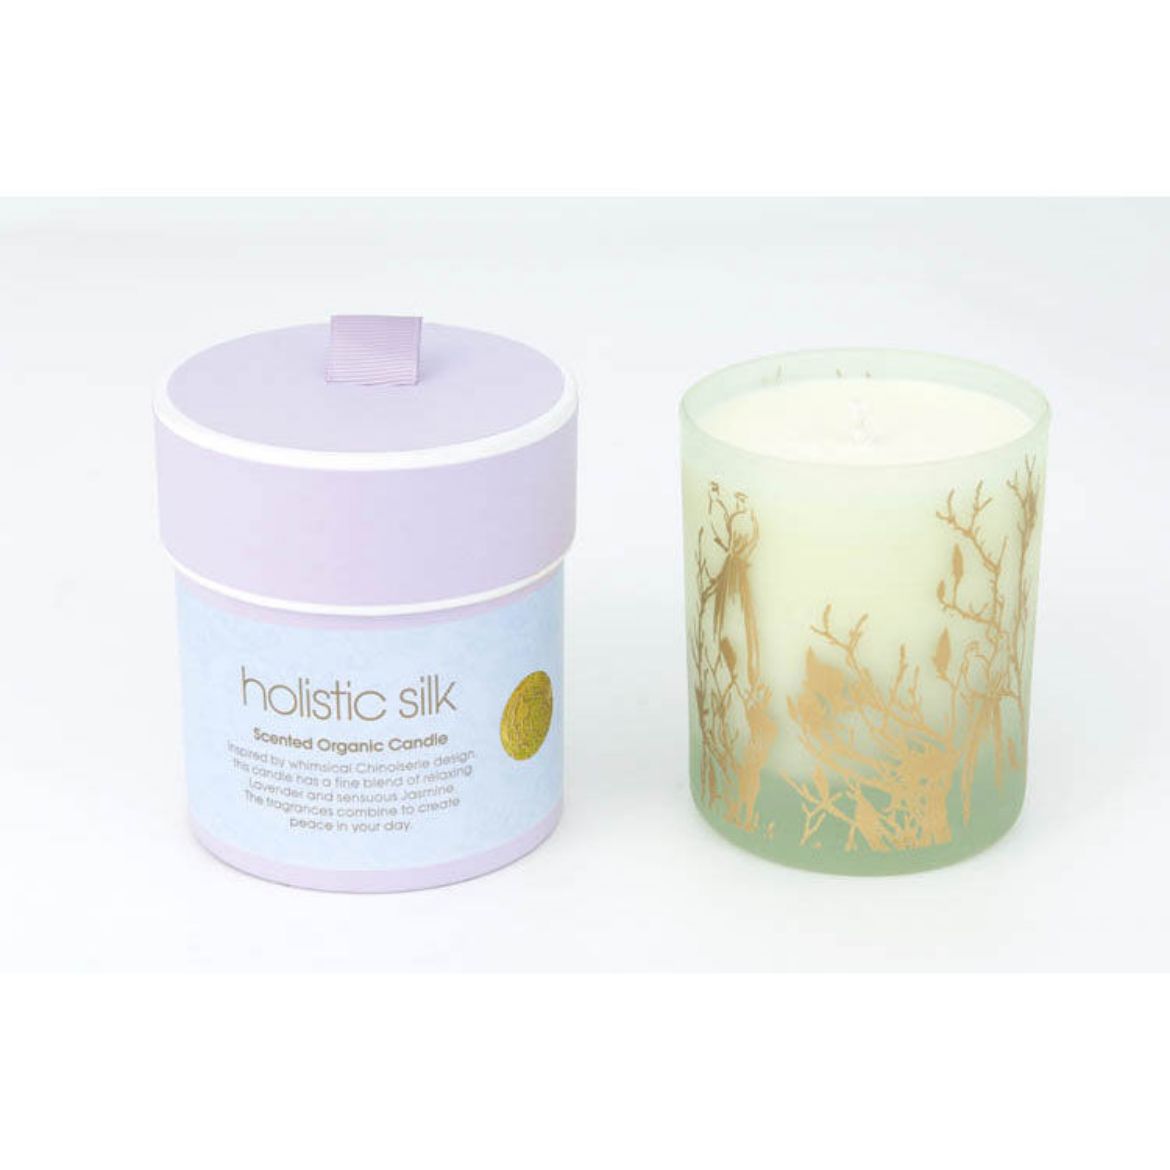 Bild von Holistic Silk Deeply Relaxing Scented Candle